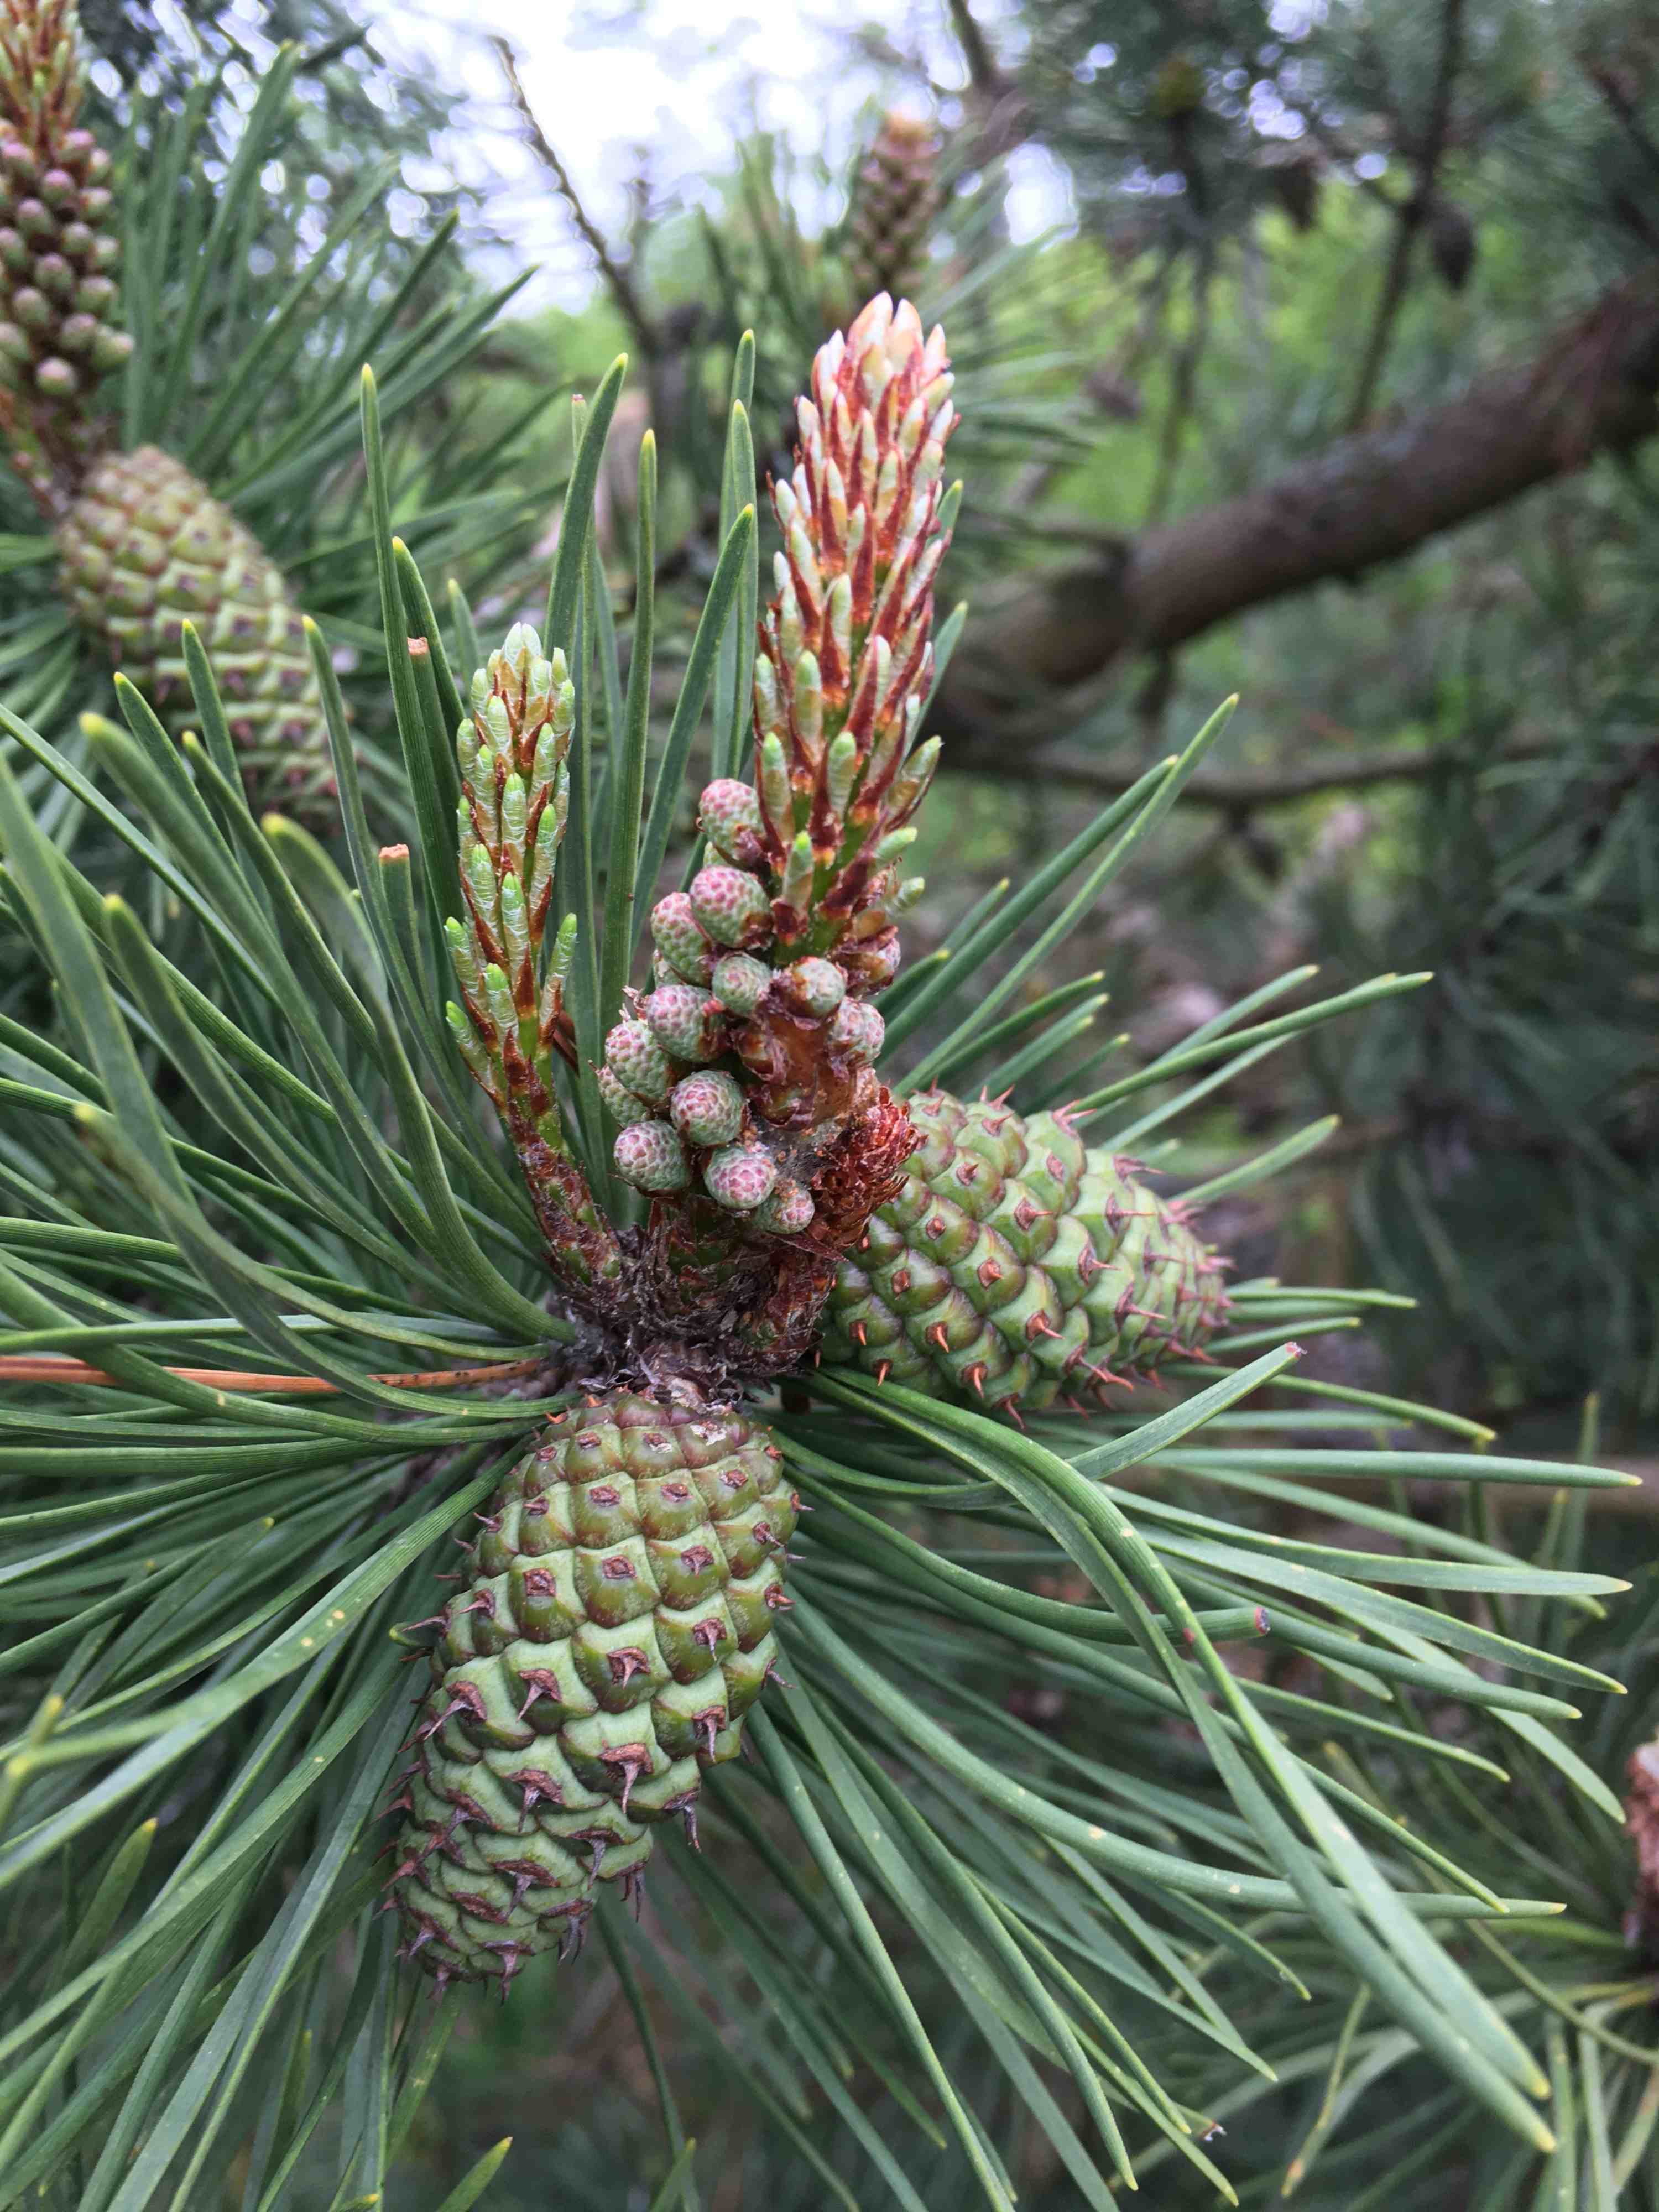 Pinus contorta new shoots and immature cones.